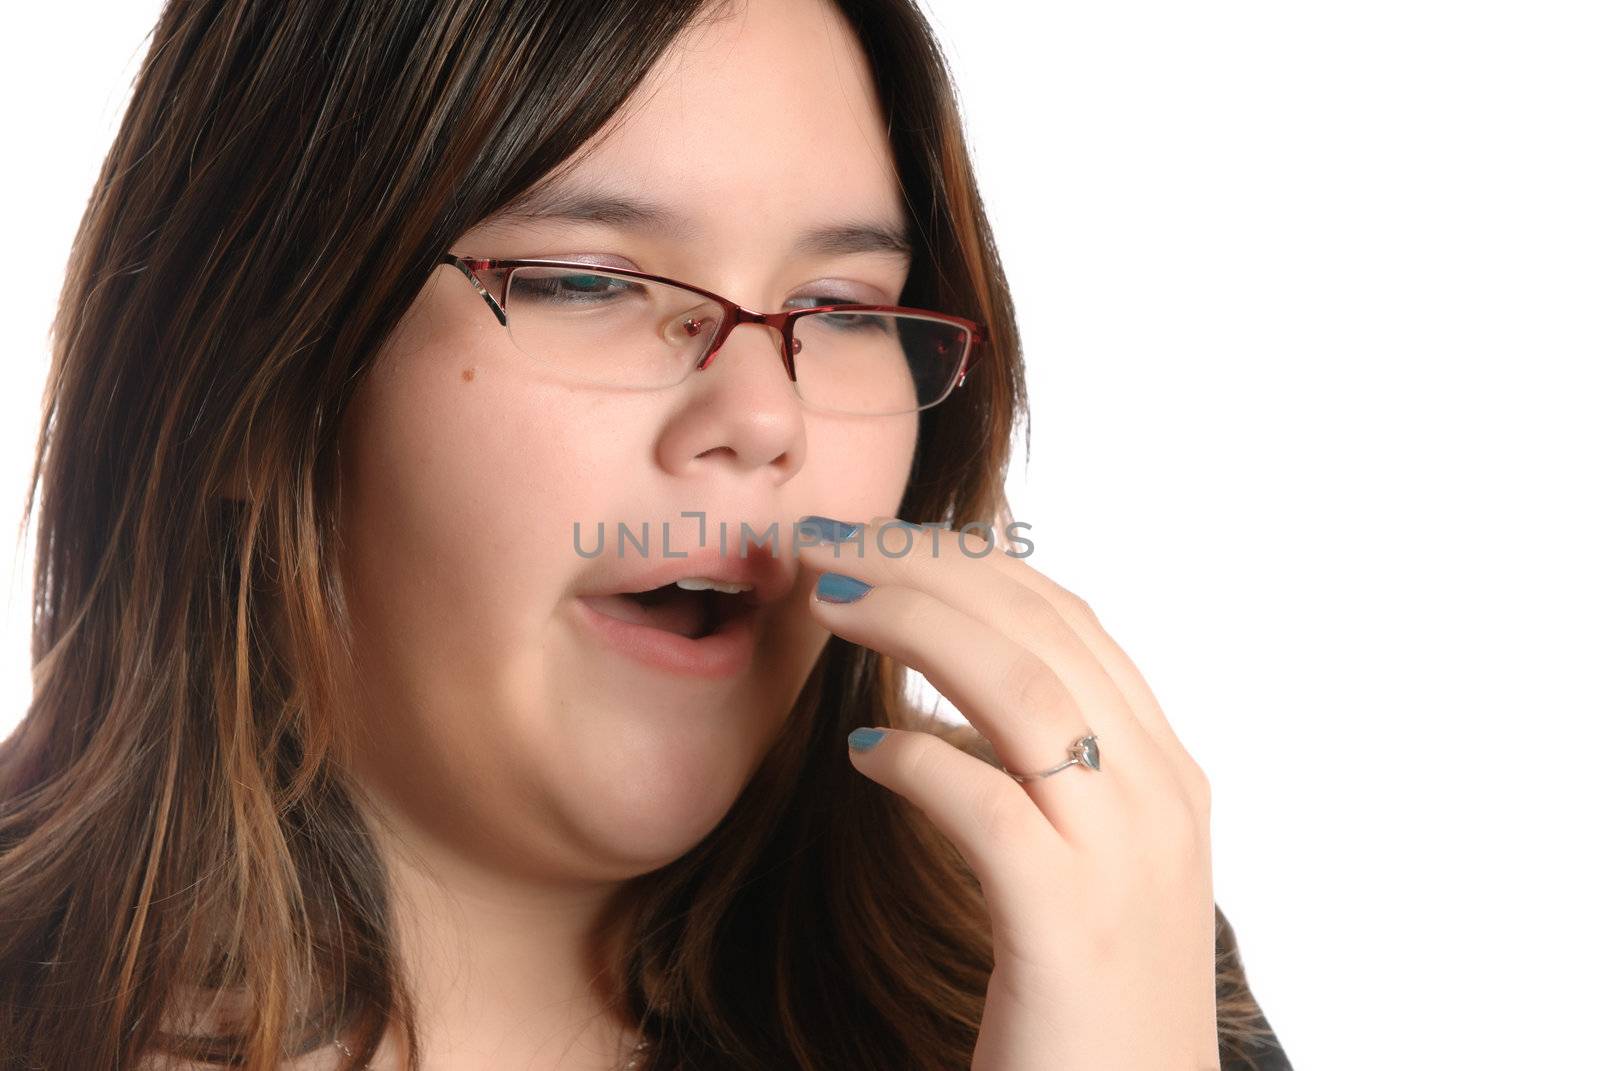 Closeup view of a yawning teenage girl, isolated against a white background